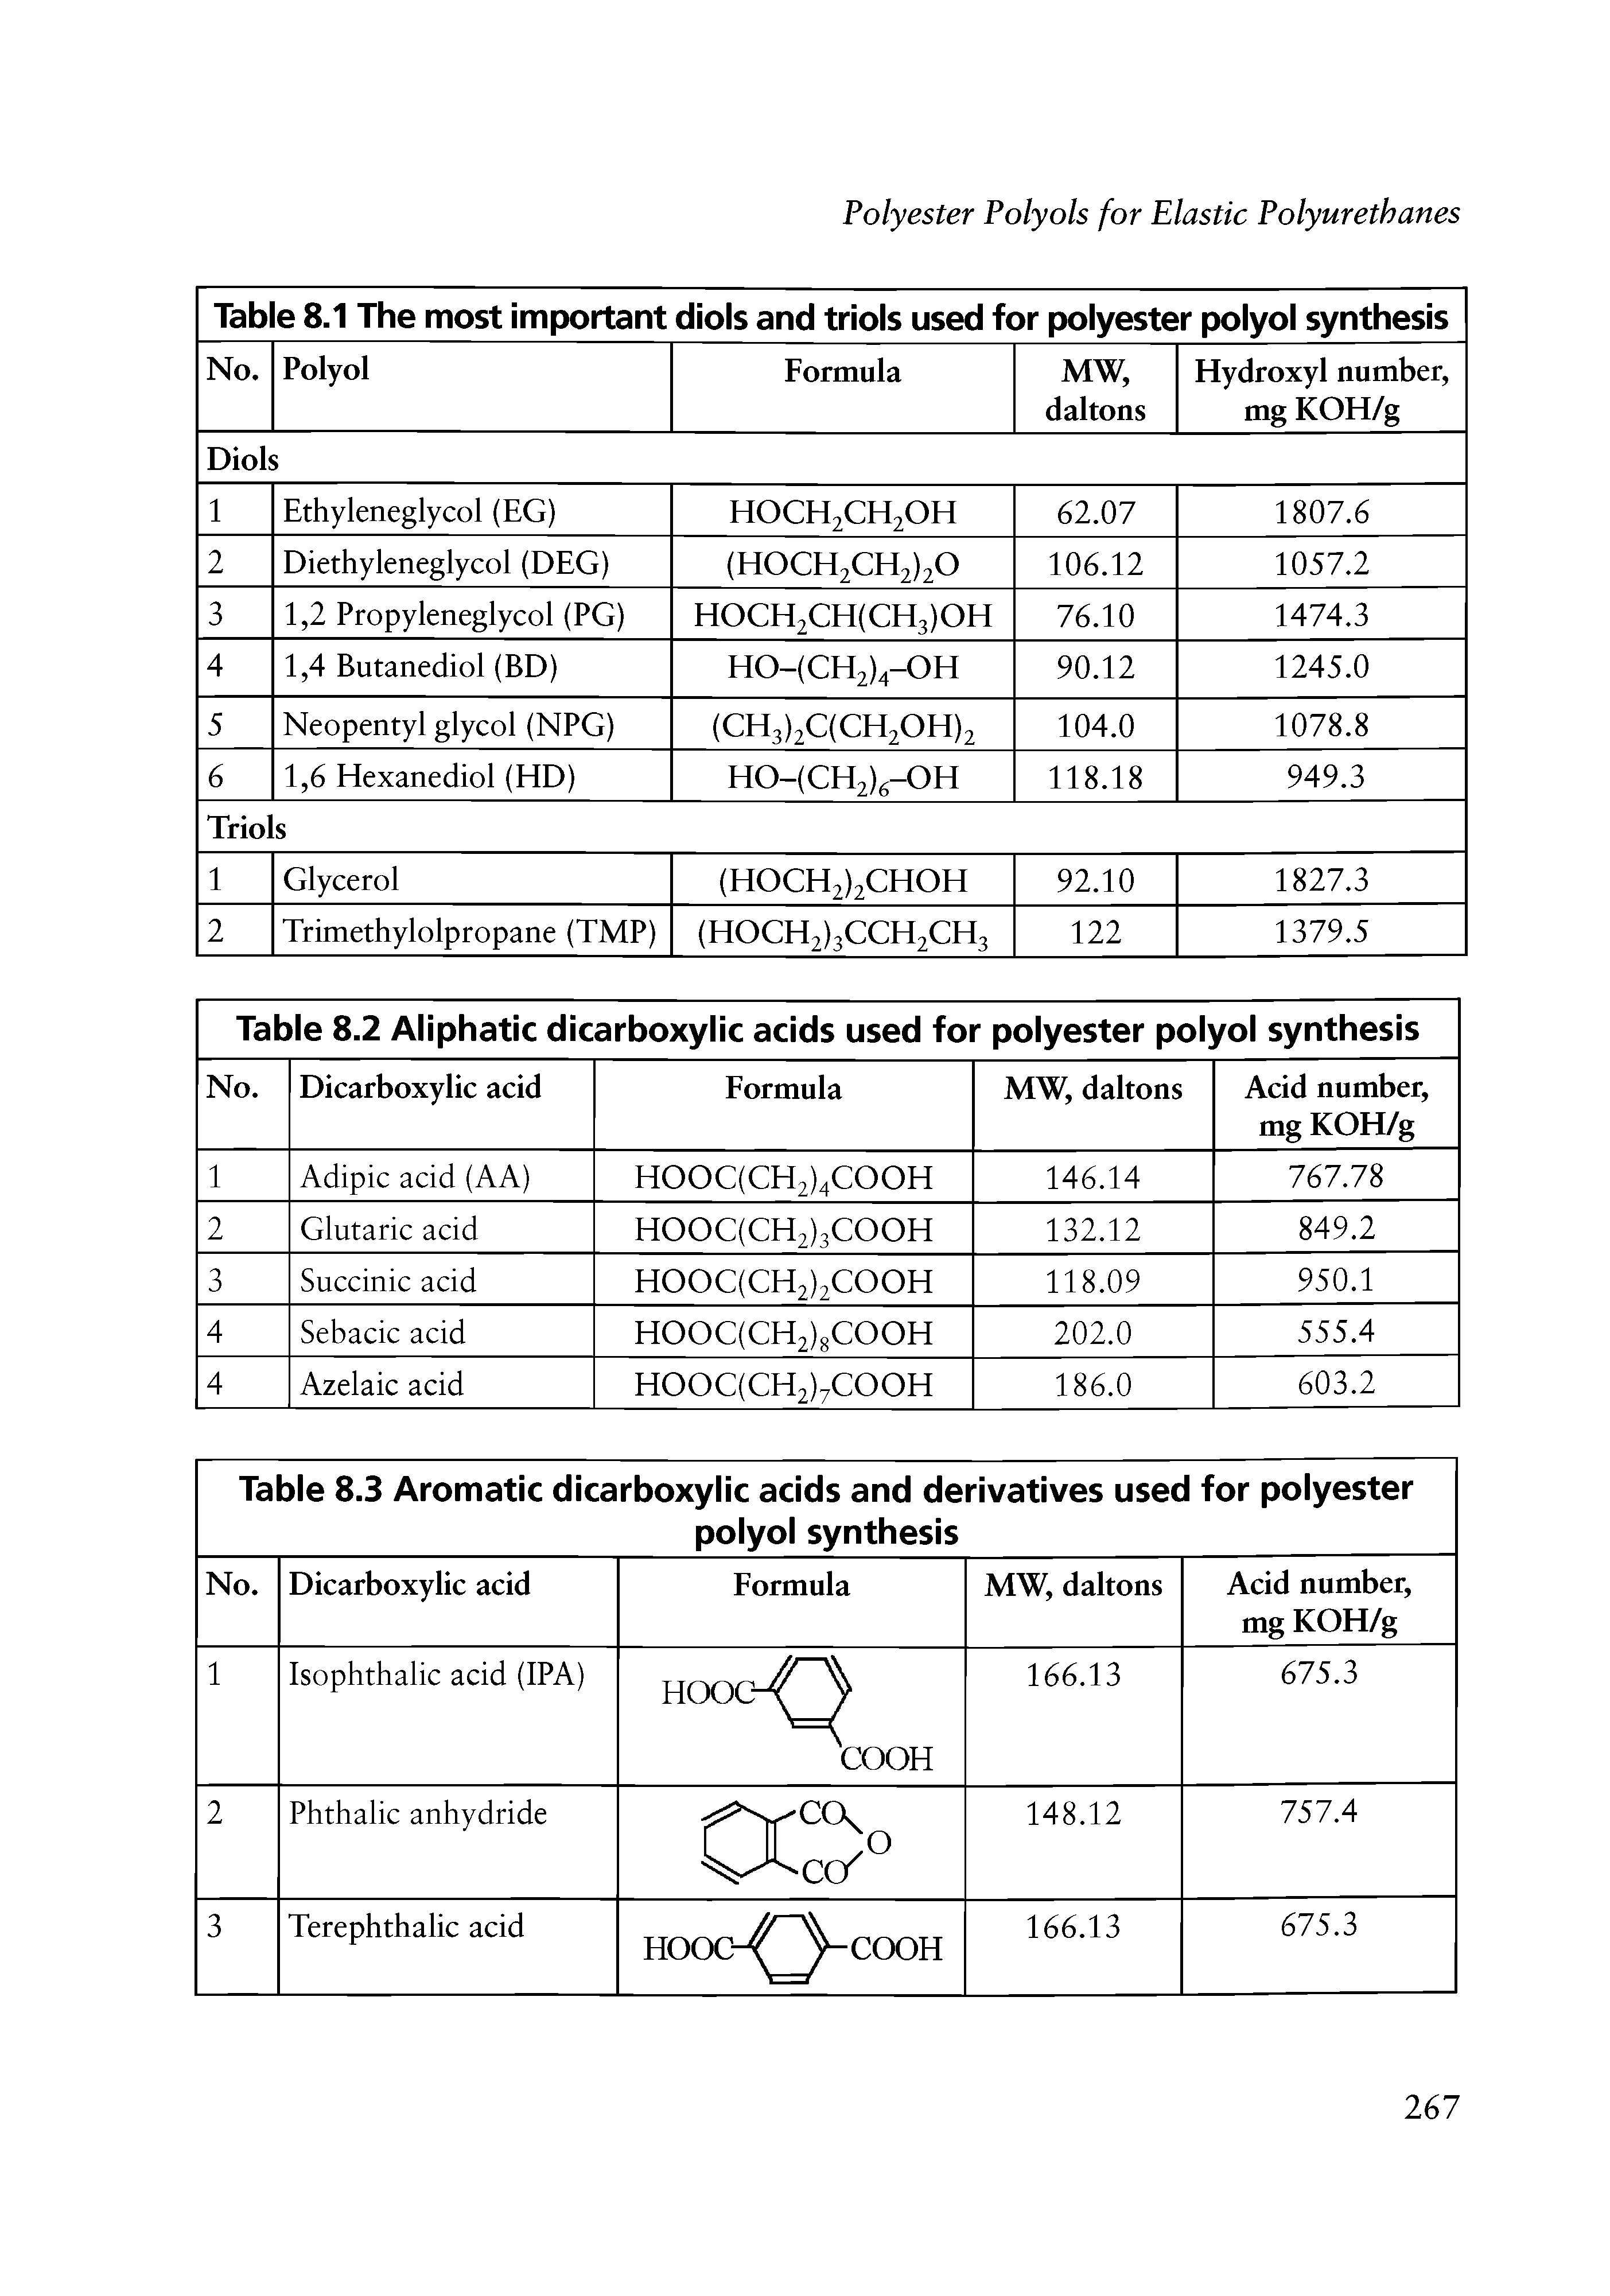 Table 8.2 Aliphatic dicarboxylic acids used for polyester poh ol synthesis...